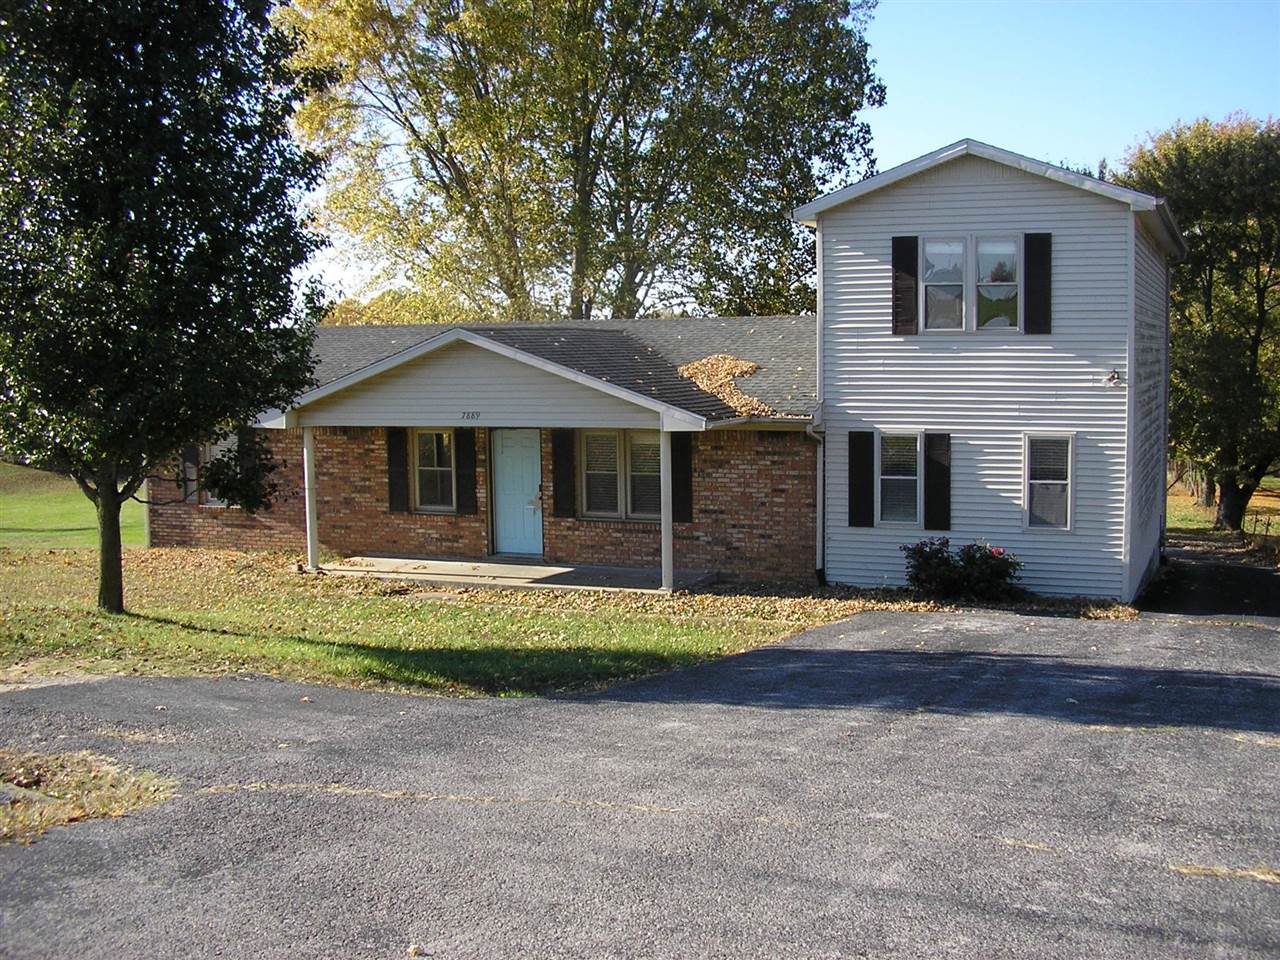 7889 Highway 185, Bowling Green, KY 42101